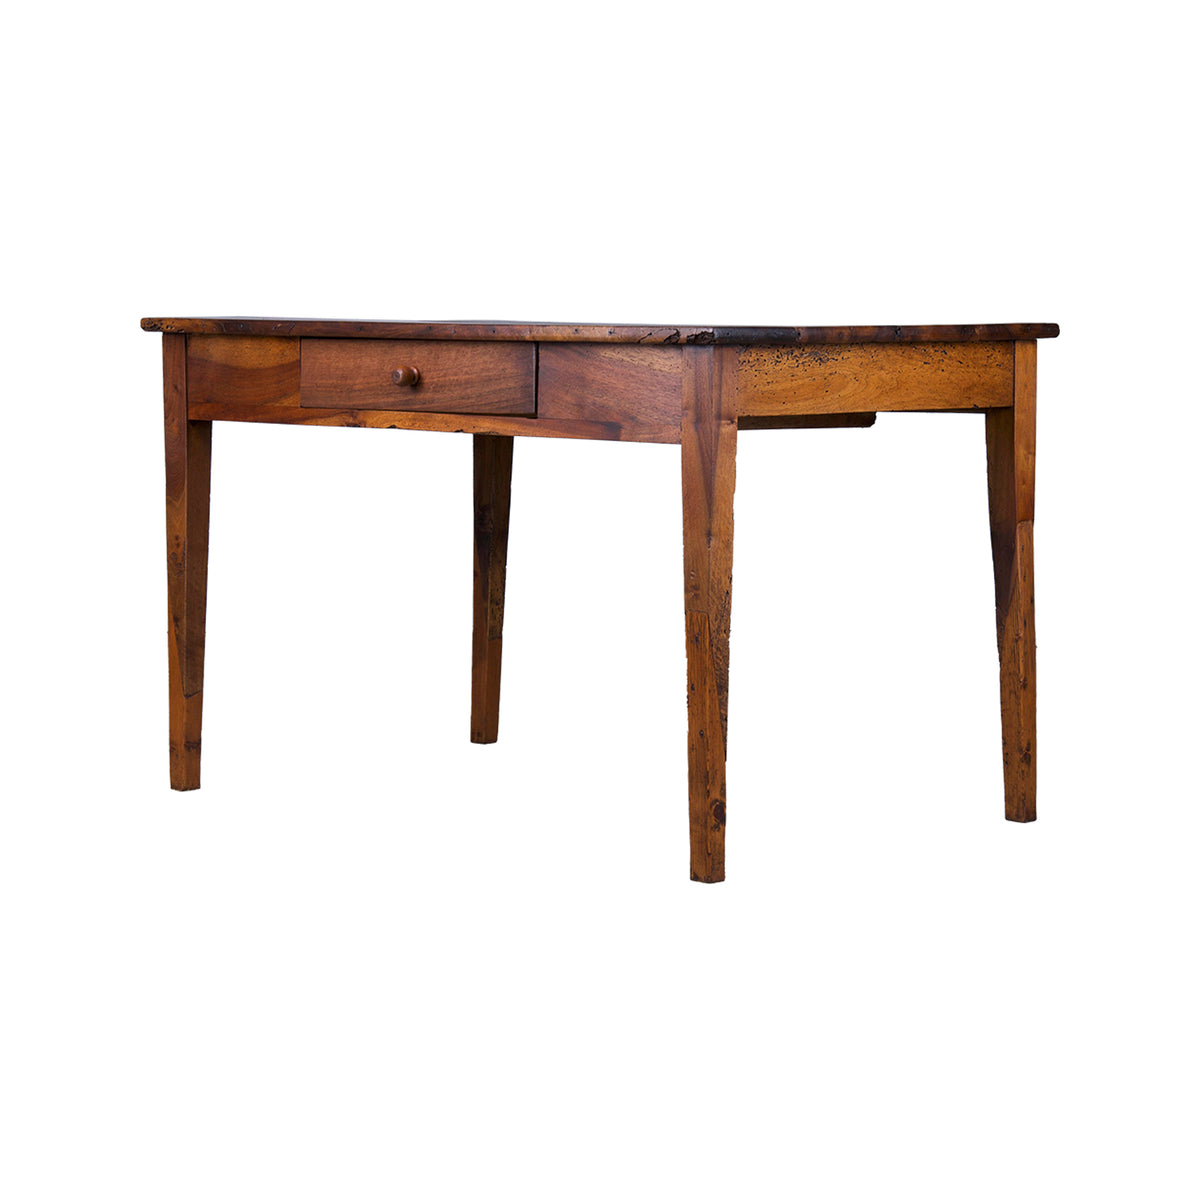 Antique Country French Walnut Farmhouse Table